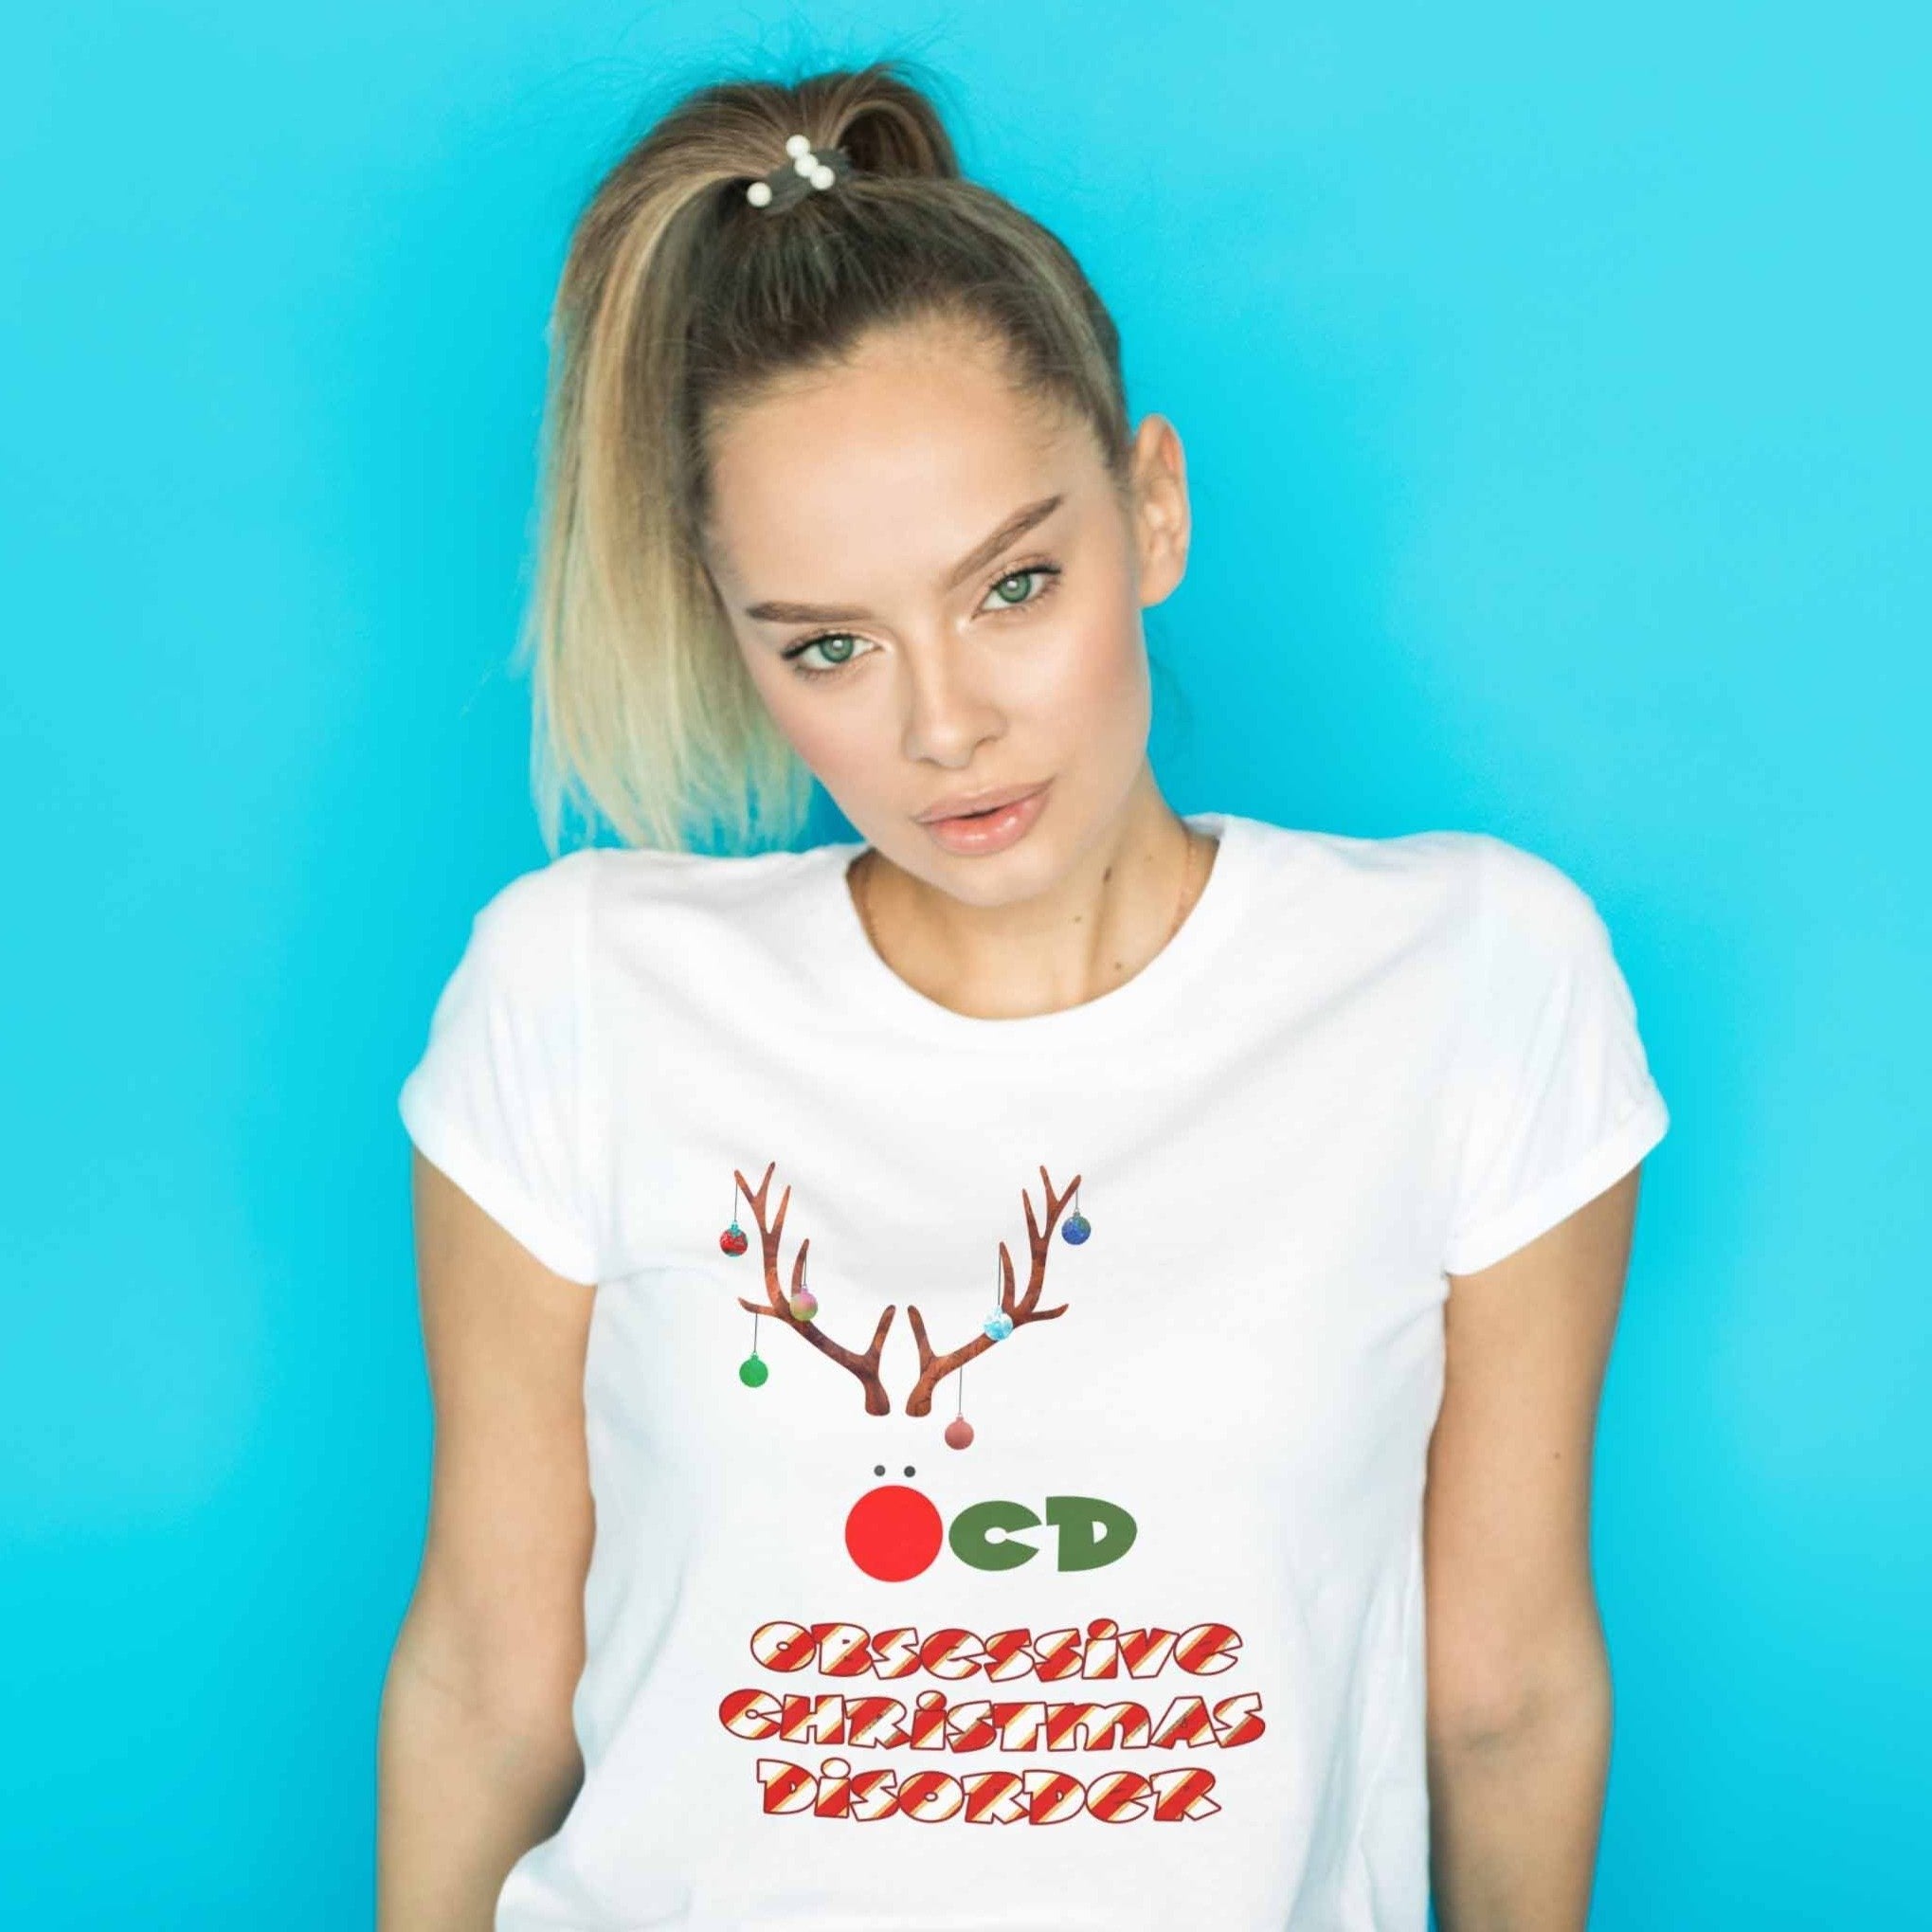 Obsessive Christmas Disorder Graphic Tee - My Custom Tee Party